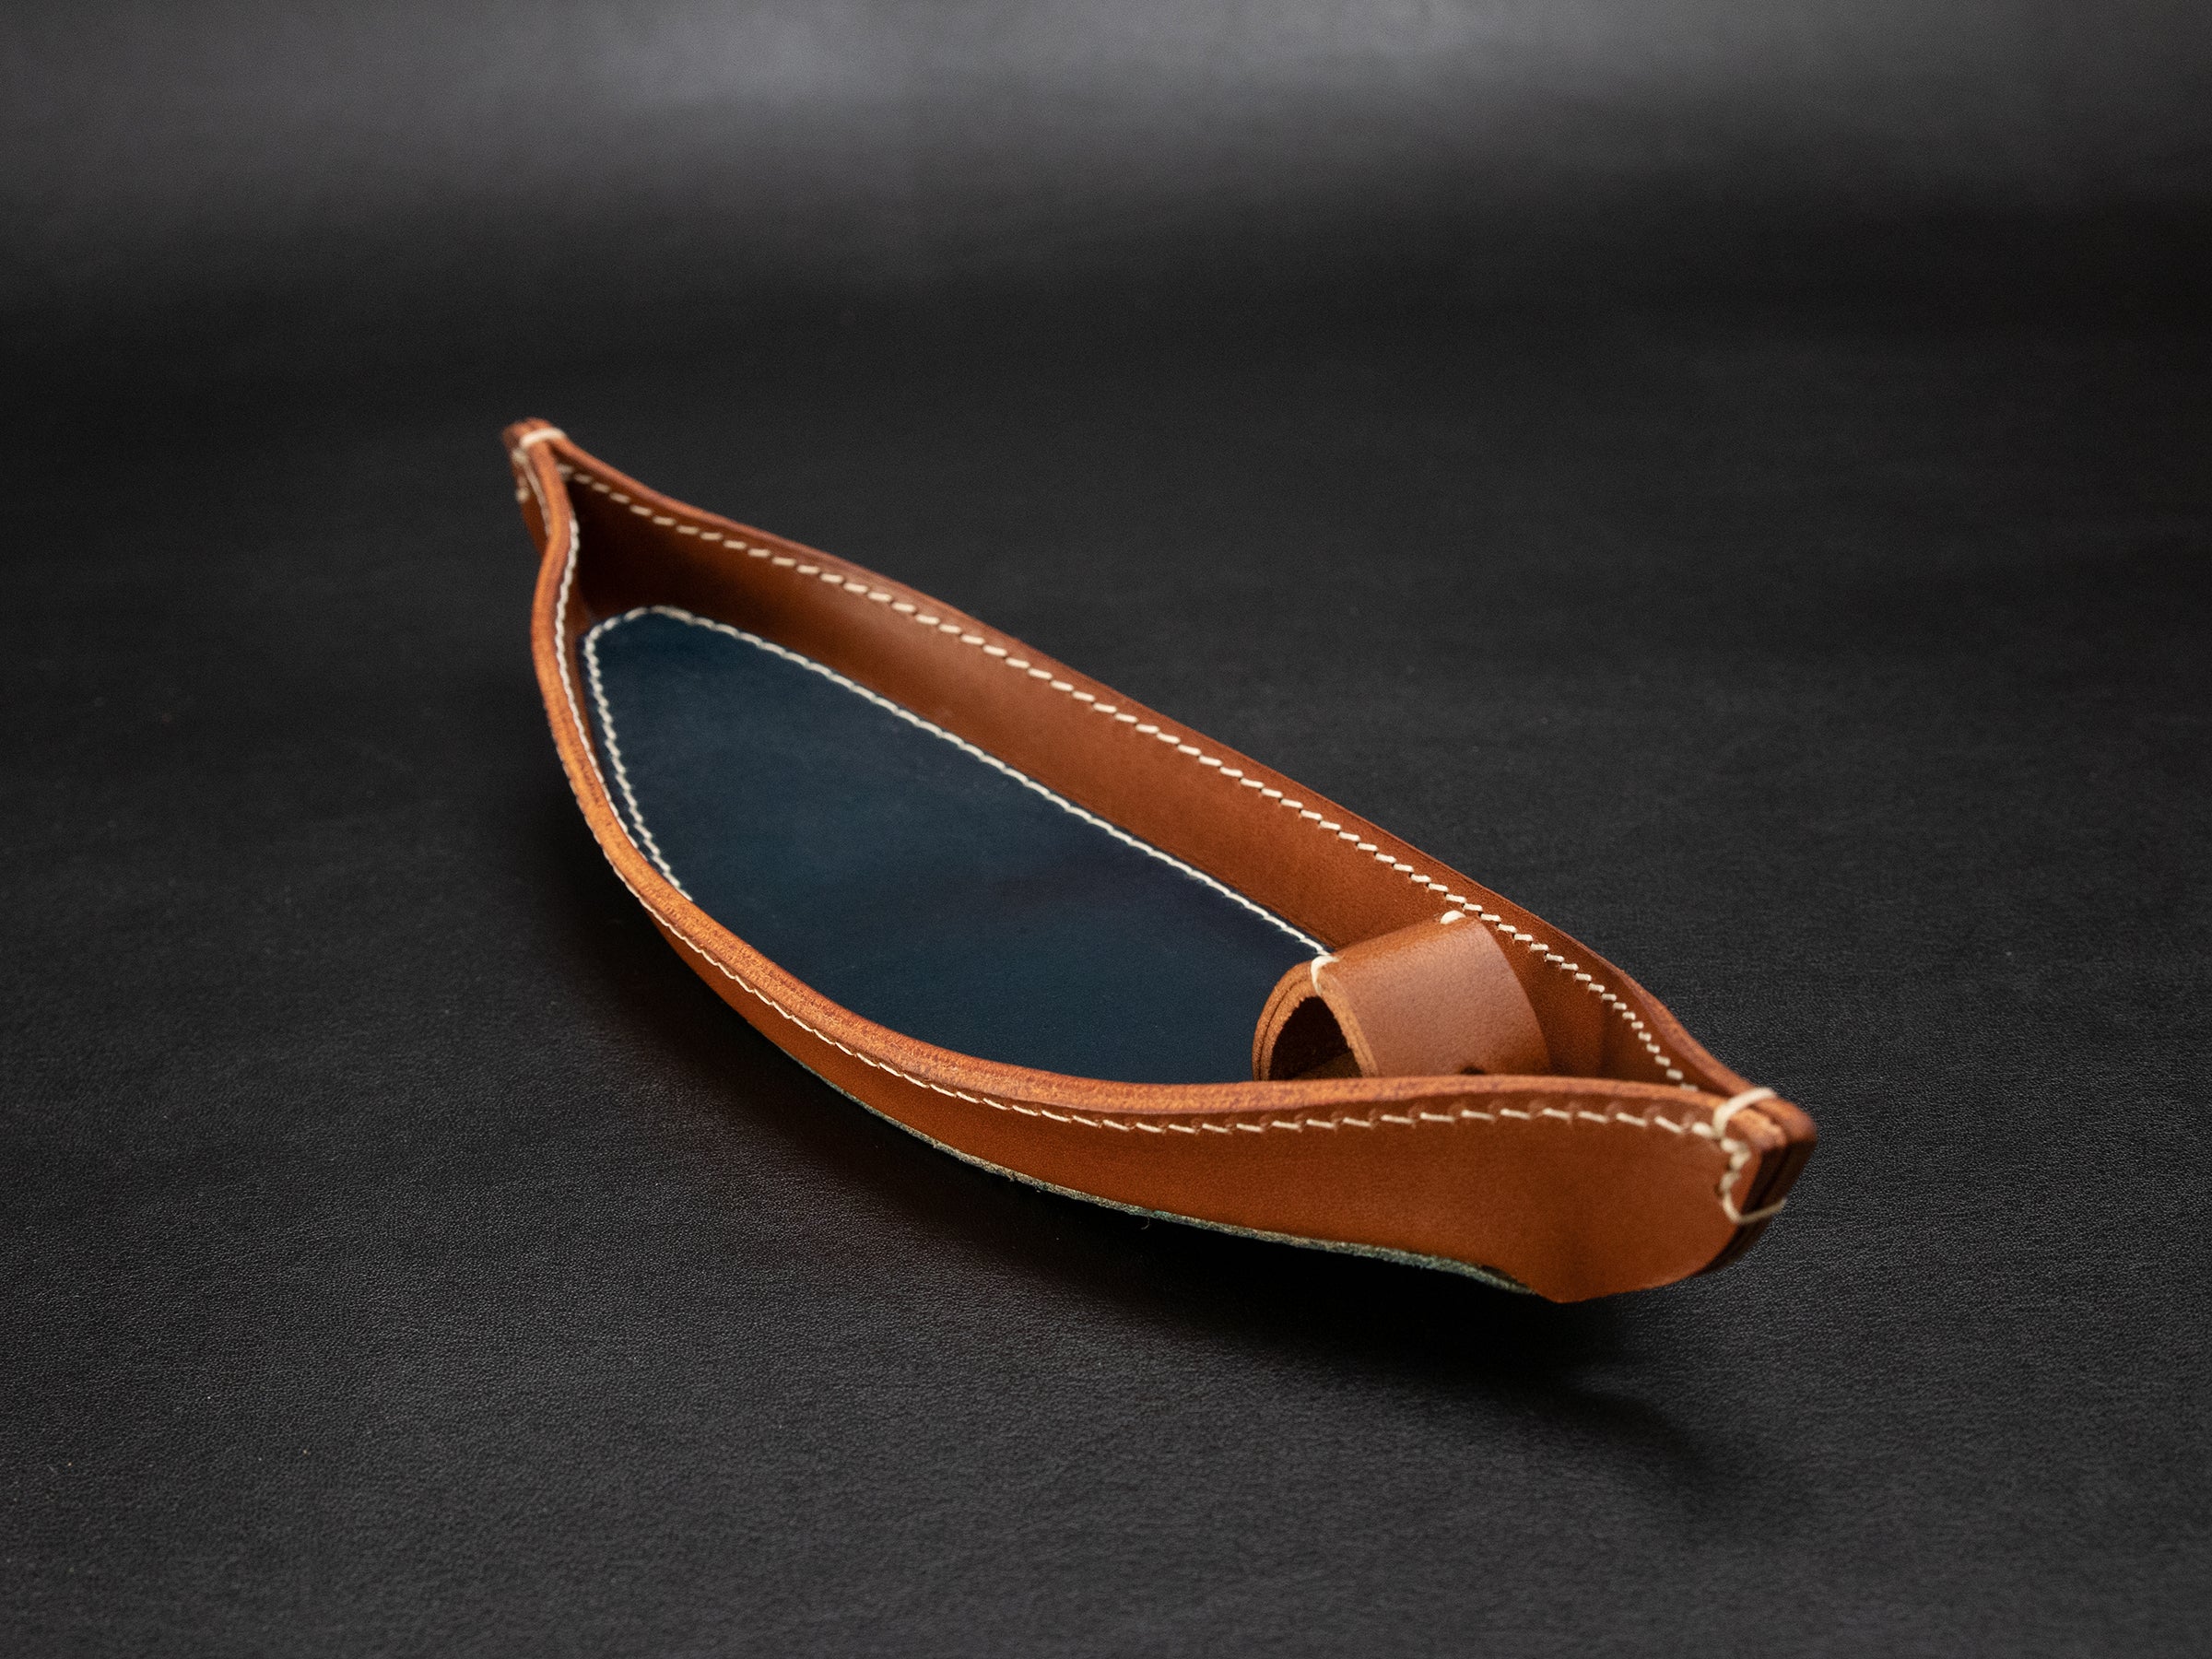 Incense Tray [Meg-Boat] - Brown/Navy - Premium Italian Veg-Tanned Leather - Personalized Stamp - Handcrafted in USA